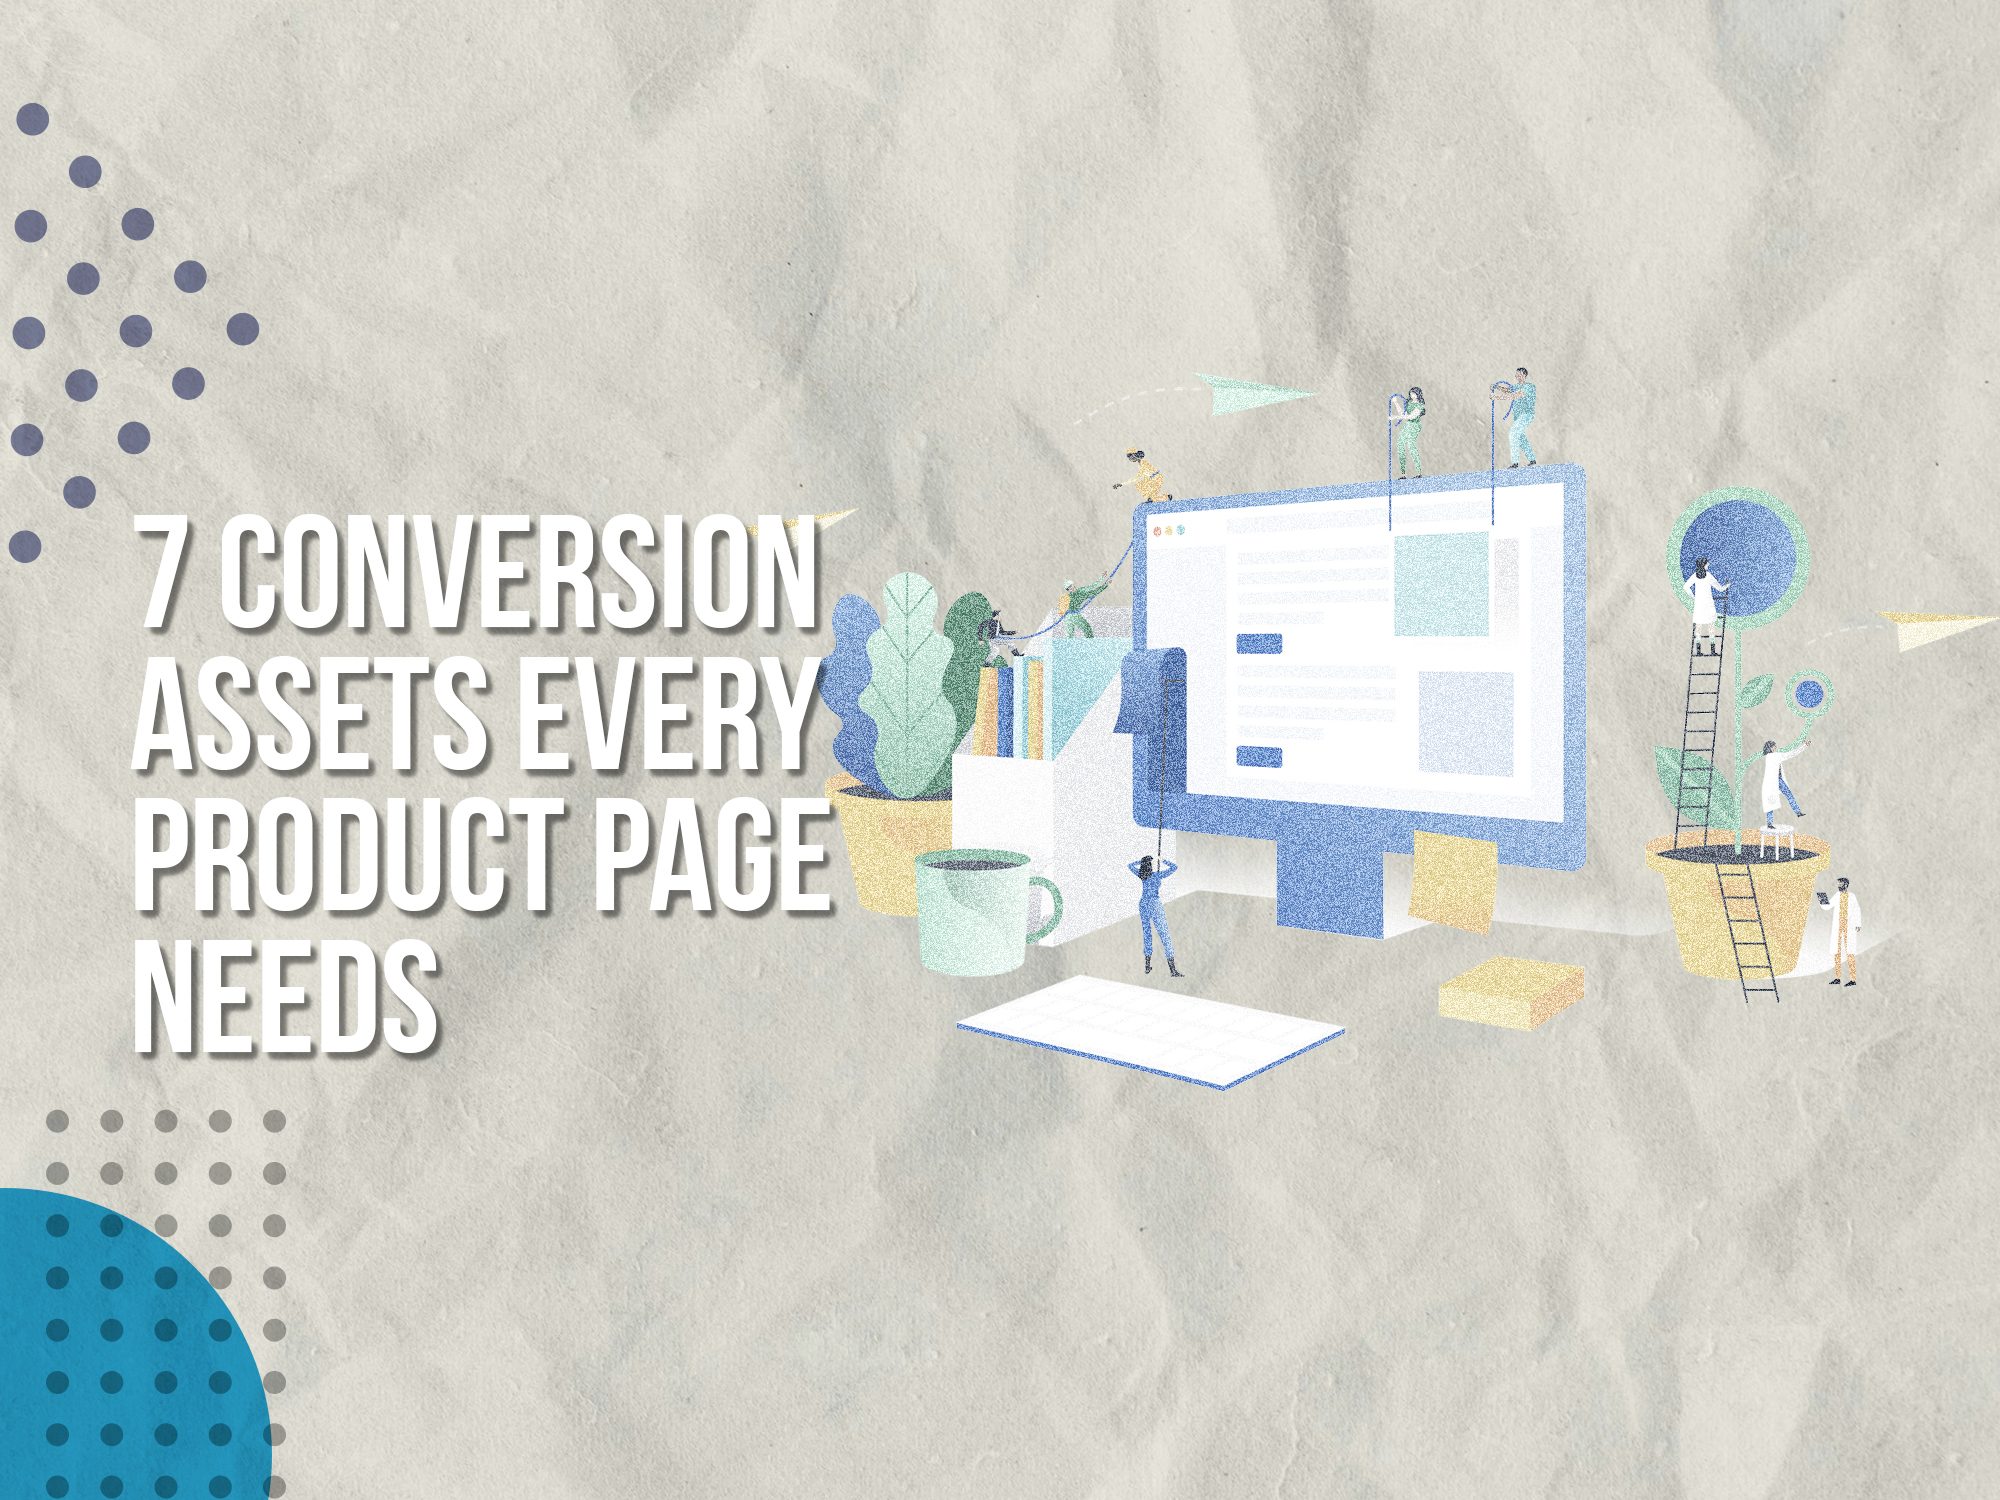 7 conversion assets every product page needs